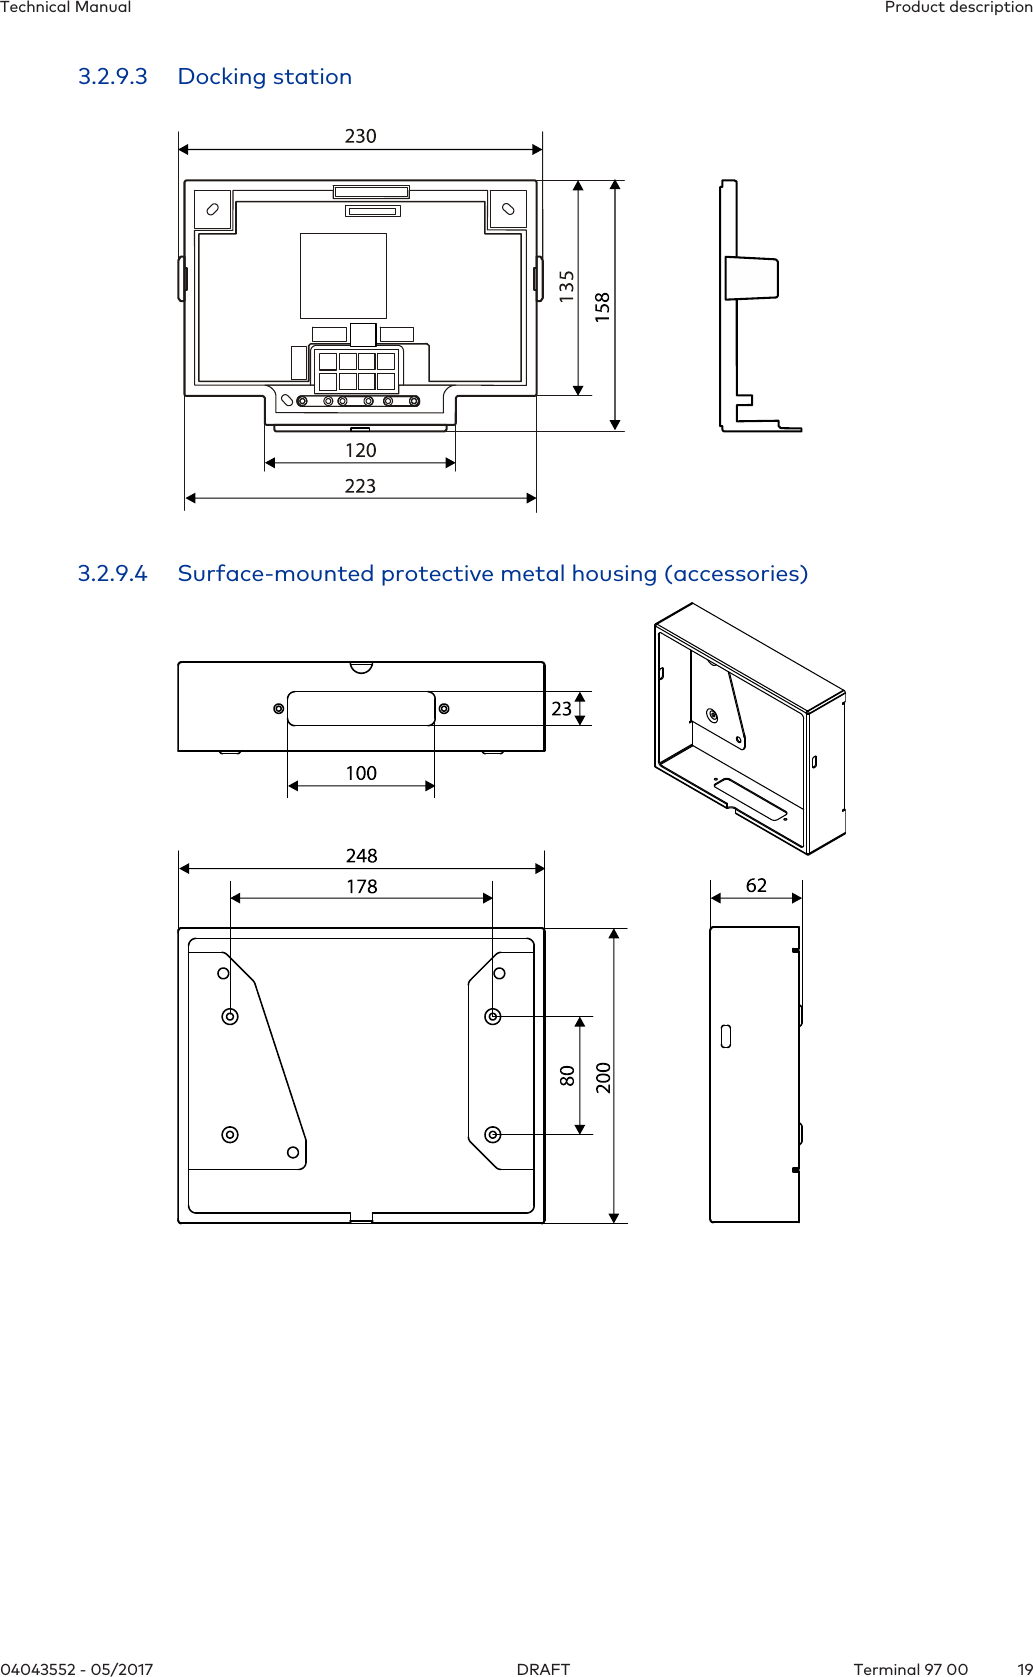 Product descriptionTechnical Manual1904043552 - 05/2017 Terminal 97 00DRAFT3.2.9.3 Docking station3.2.9.4 Surface-mounted protective metal housing (accessories)